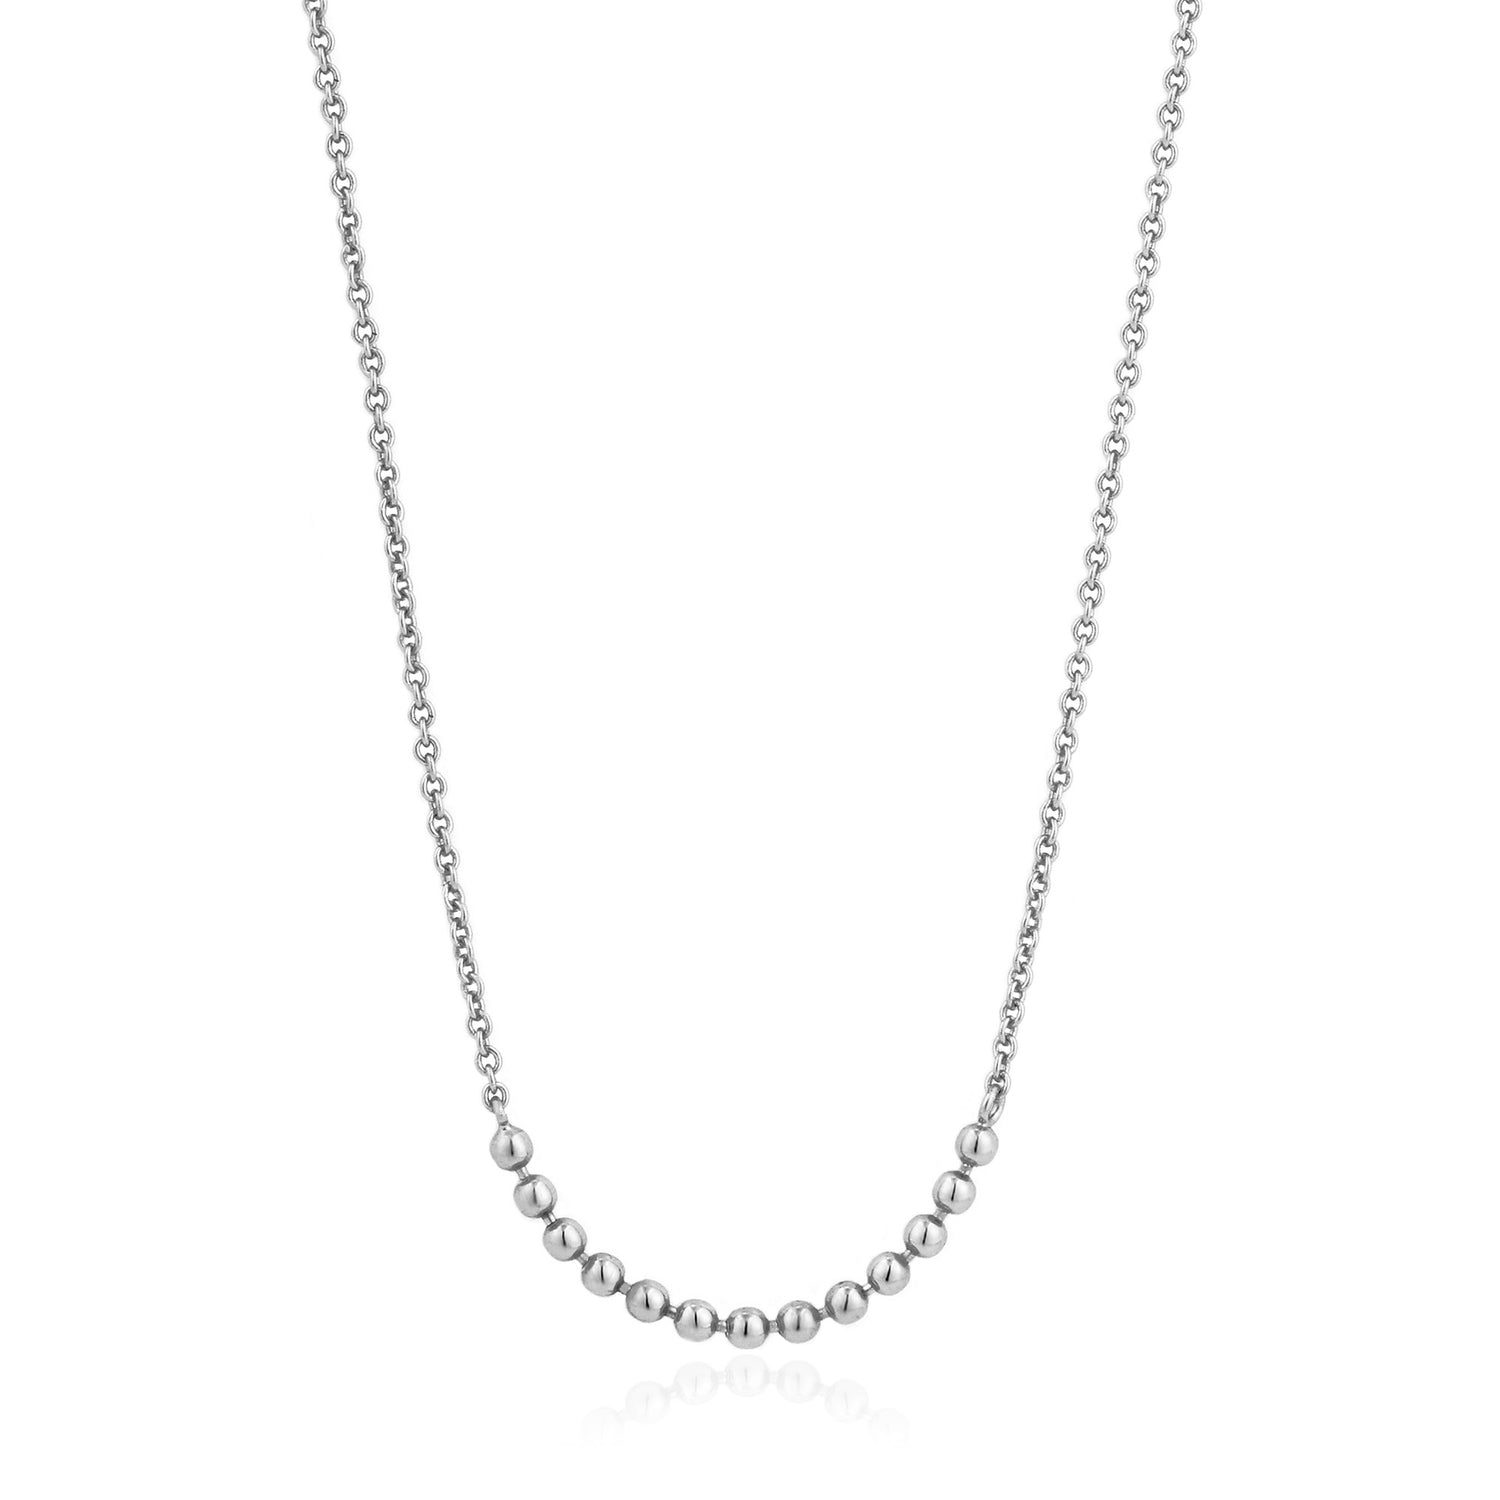 ANIA HAIE ANIA HAIE - Silver Modern Multiple Balls Necklace available at The Good Life Boutique